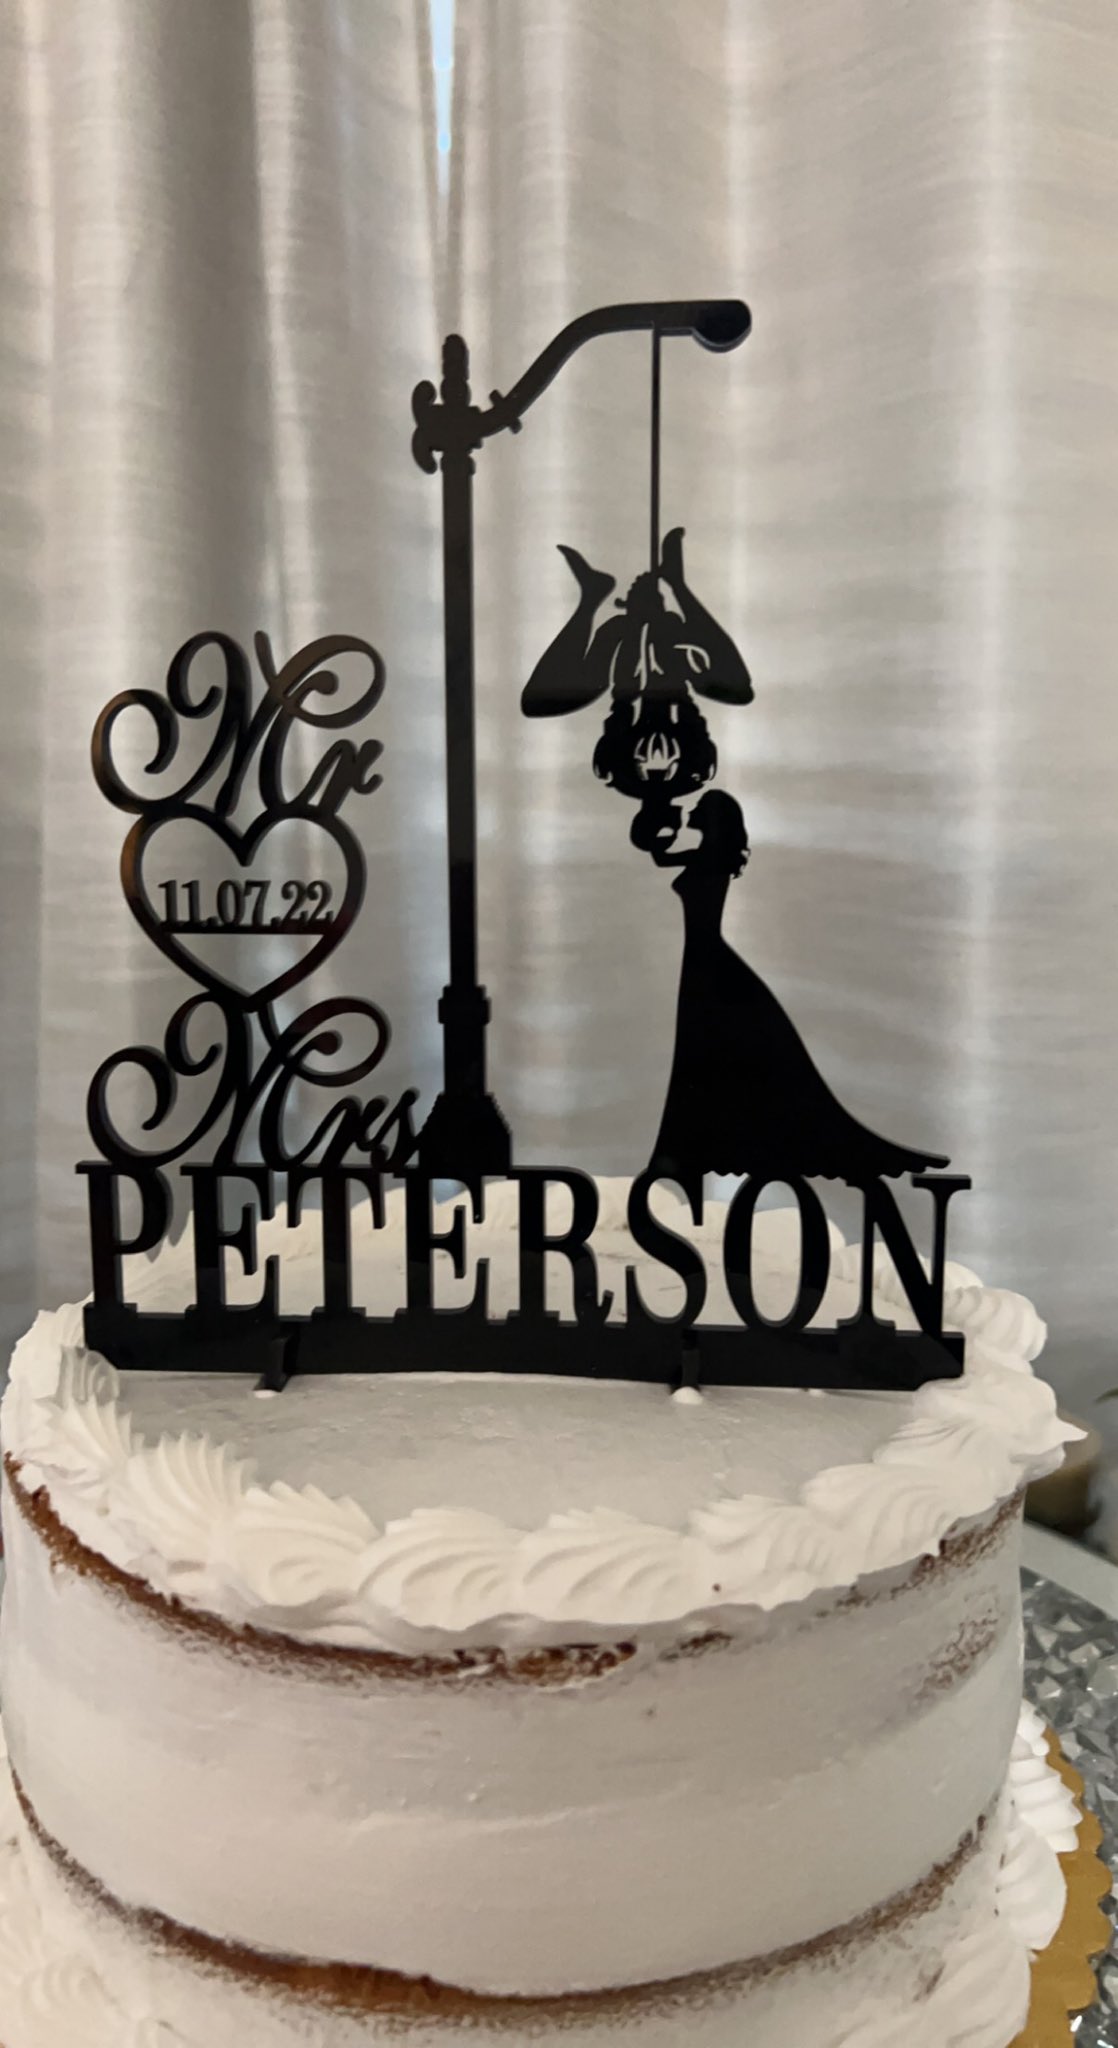 Mark Peterson on X: My cake topper #SpiderMan  / X